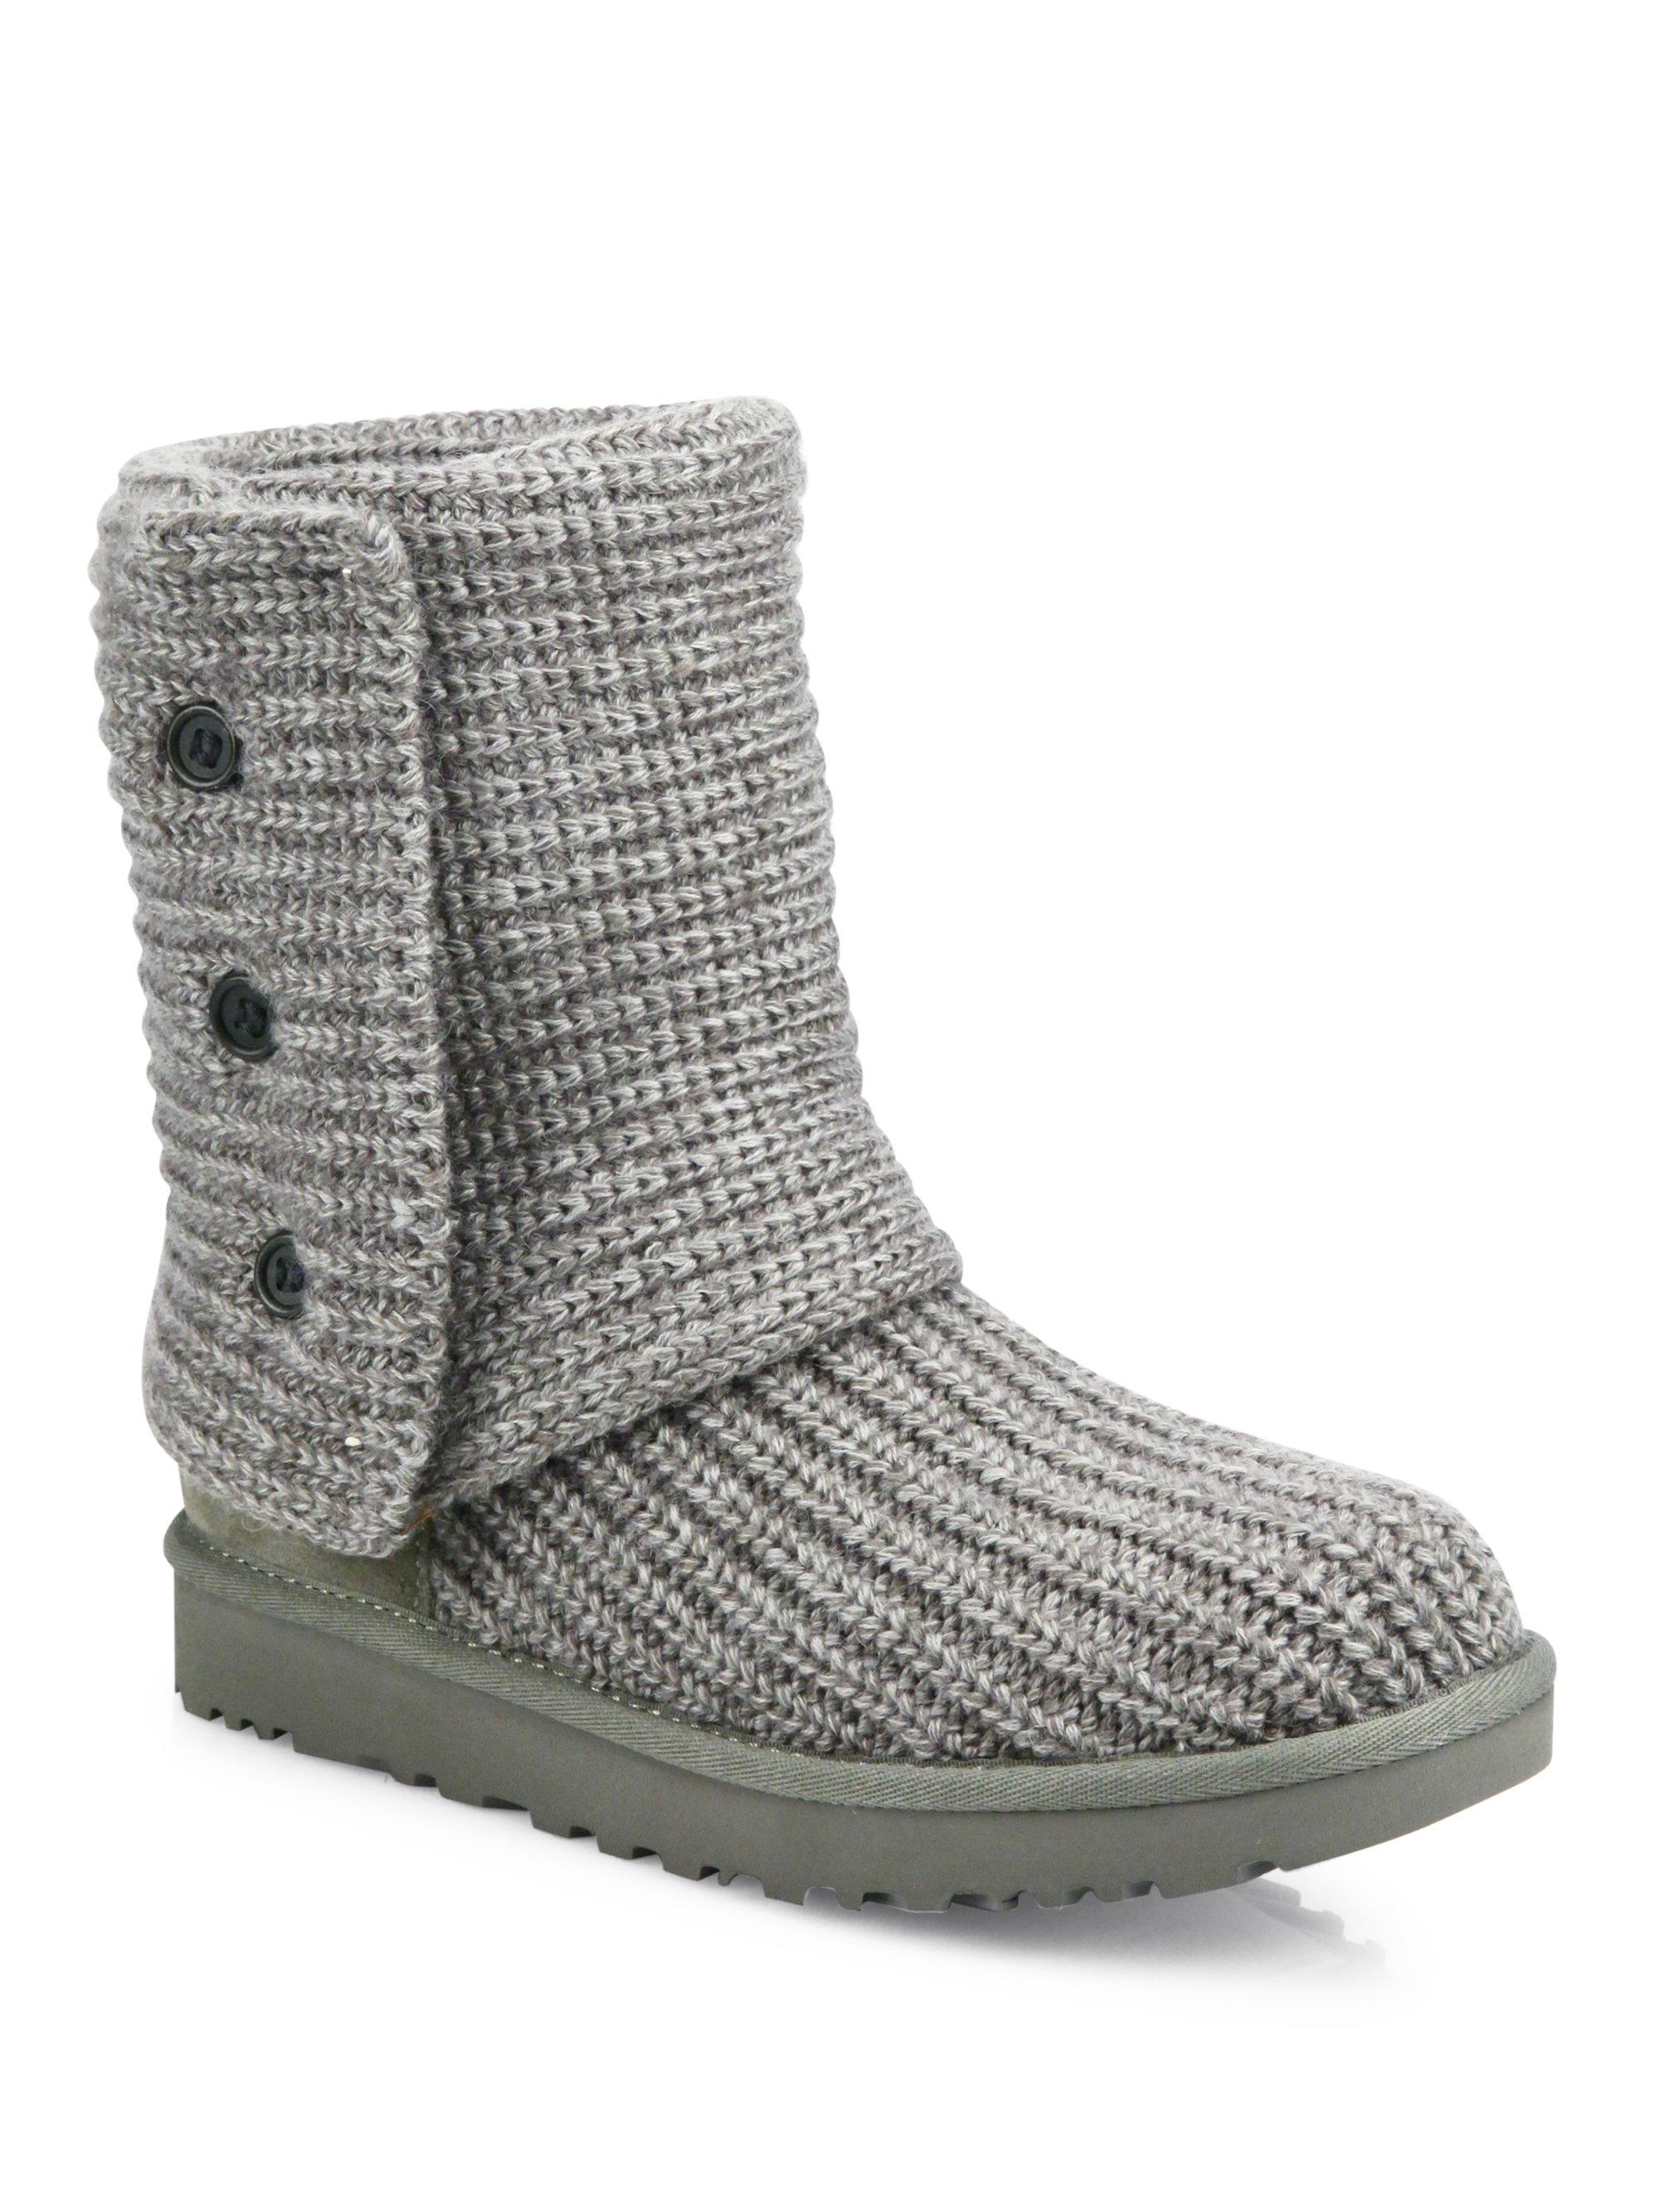 Lyst - Ugg Classic Cardy Knit Boots in Gray